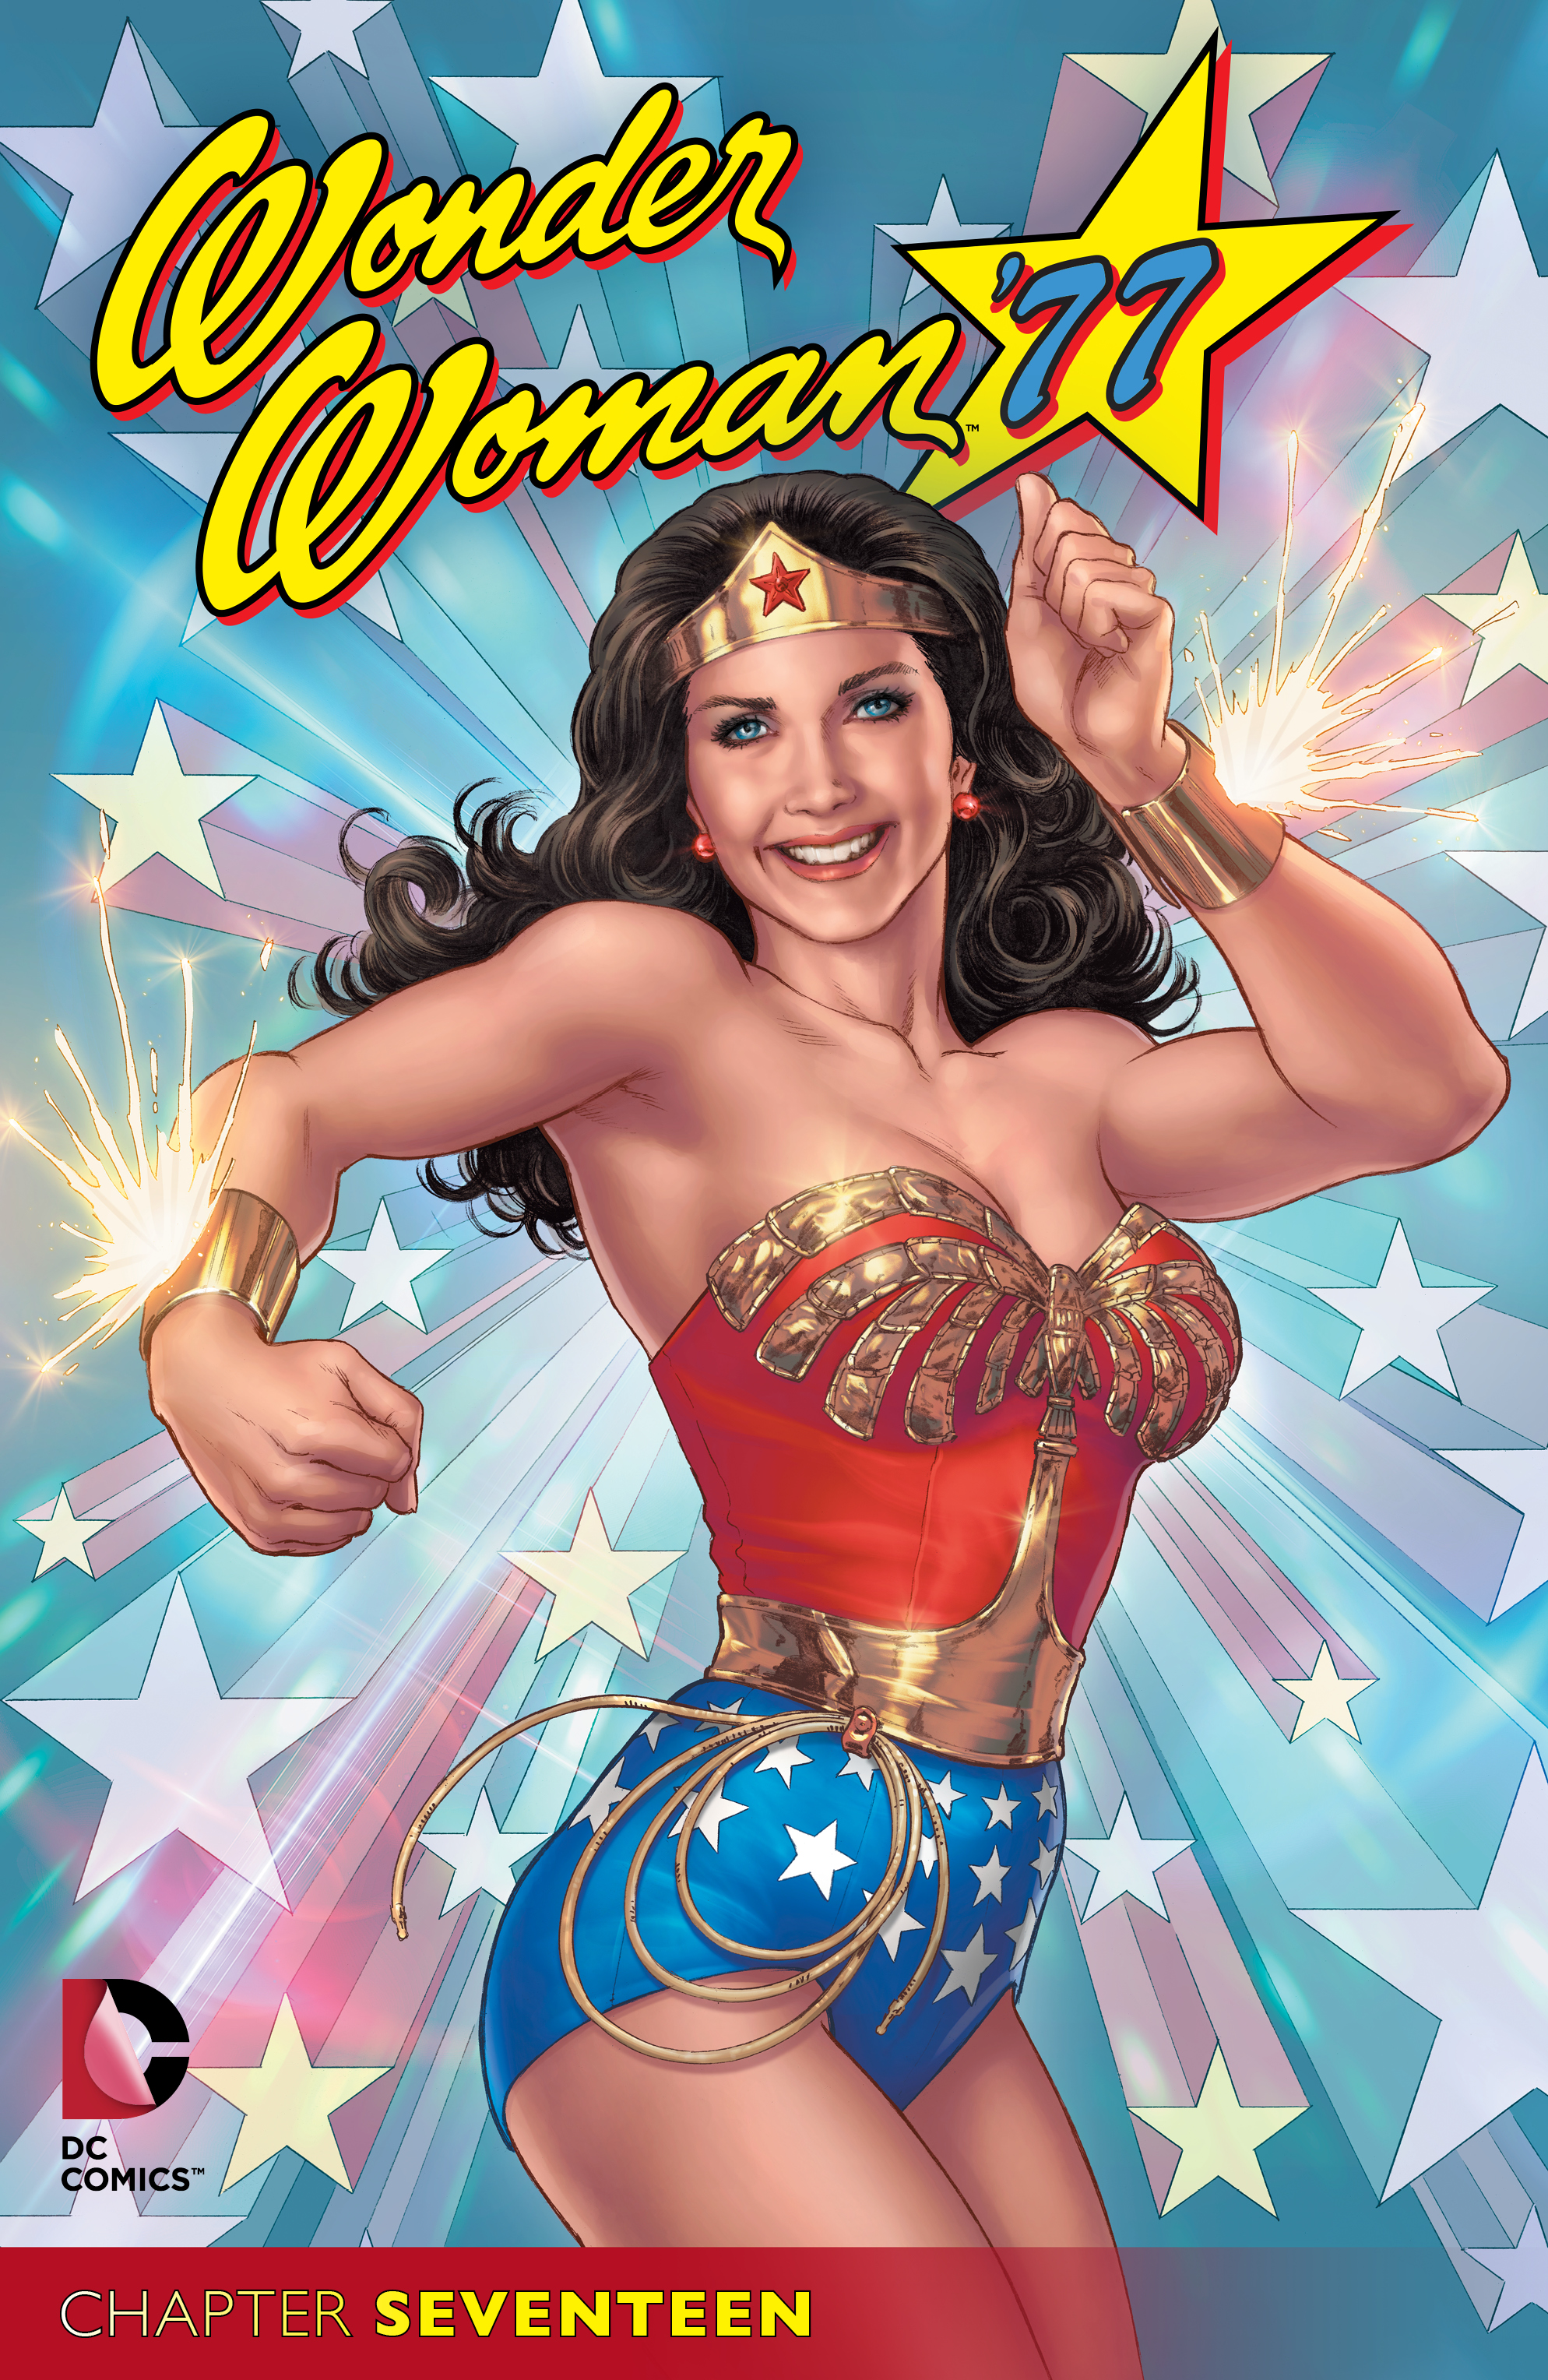 Wonder Woman '77 #17 preview images